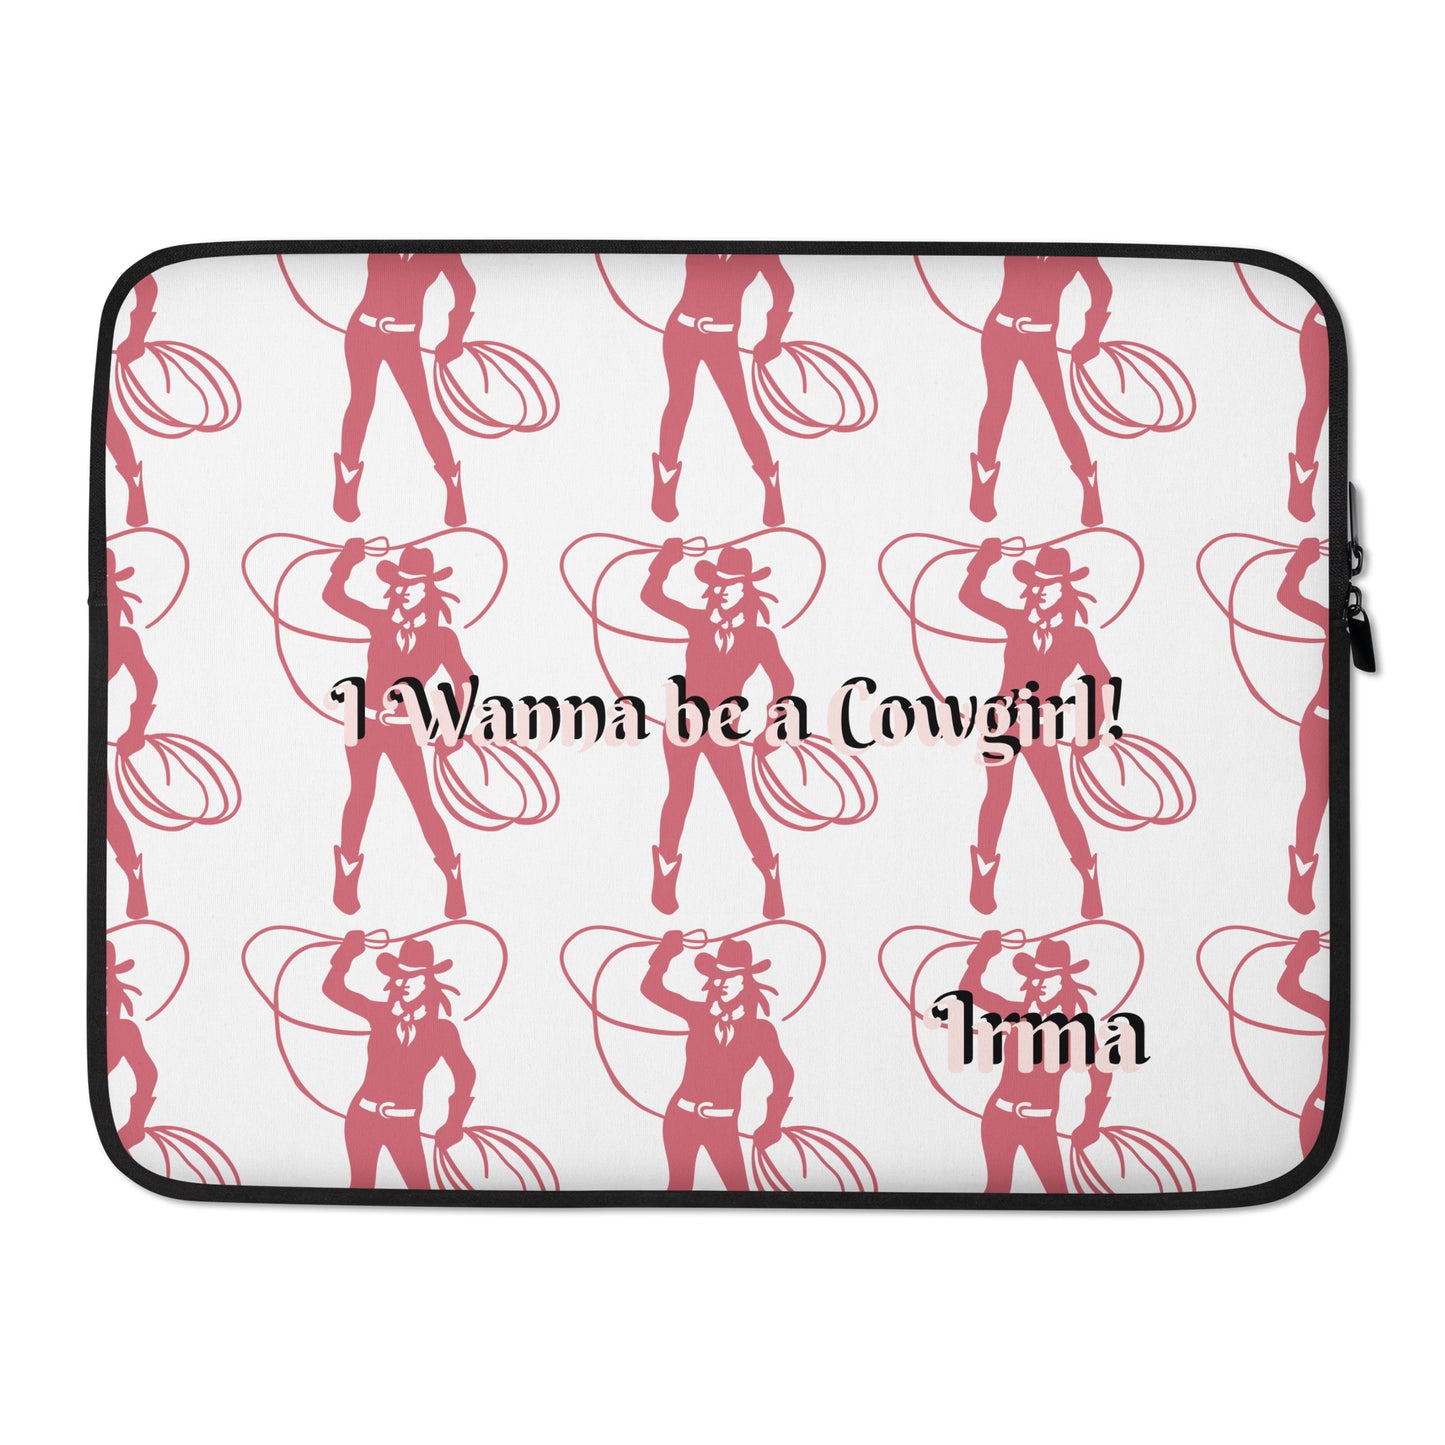 I wanna be a Cowgirl by Irma Laptop Sleeve